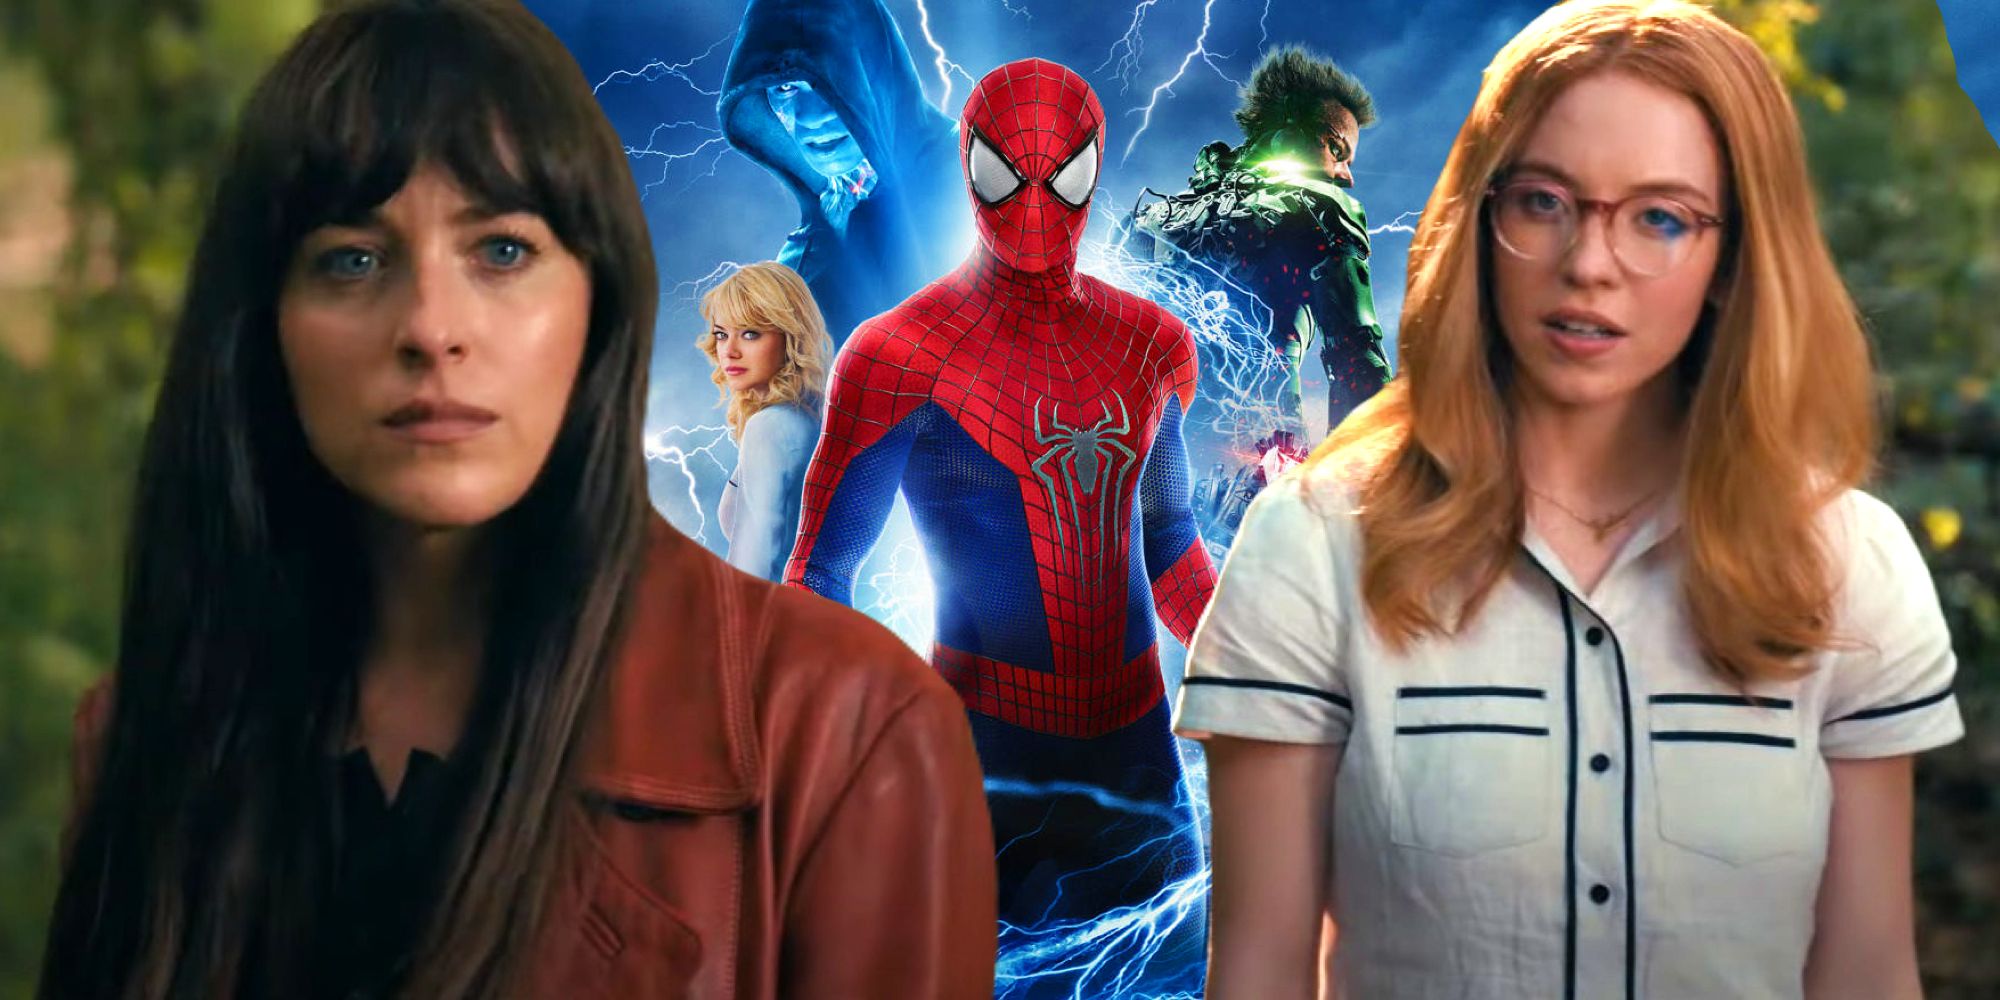 The poster for The Amazing Spider-Man 2 showing Andrew Garfield's Spider-Man between Dakota Johnson and Sydney Sweeney as seen in Madame Web